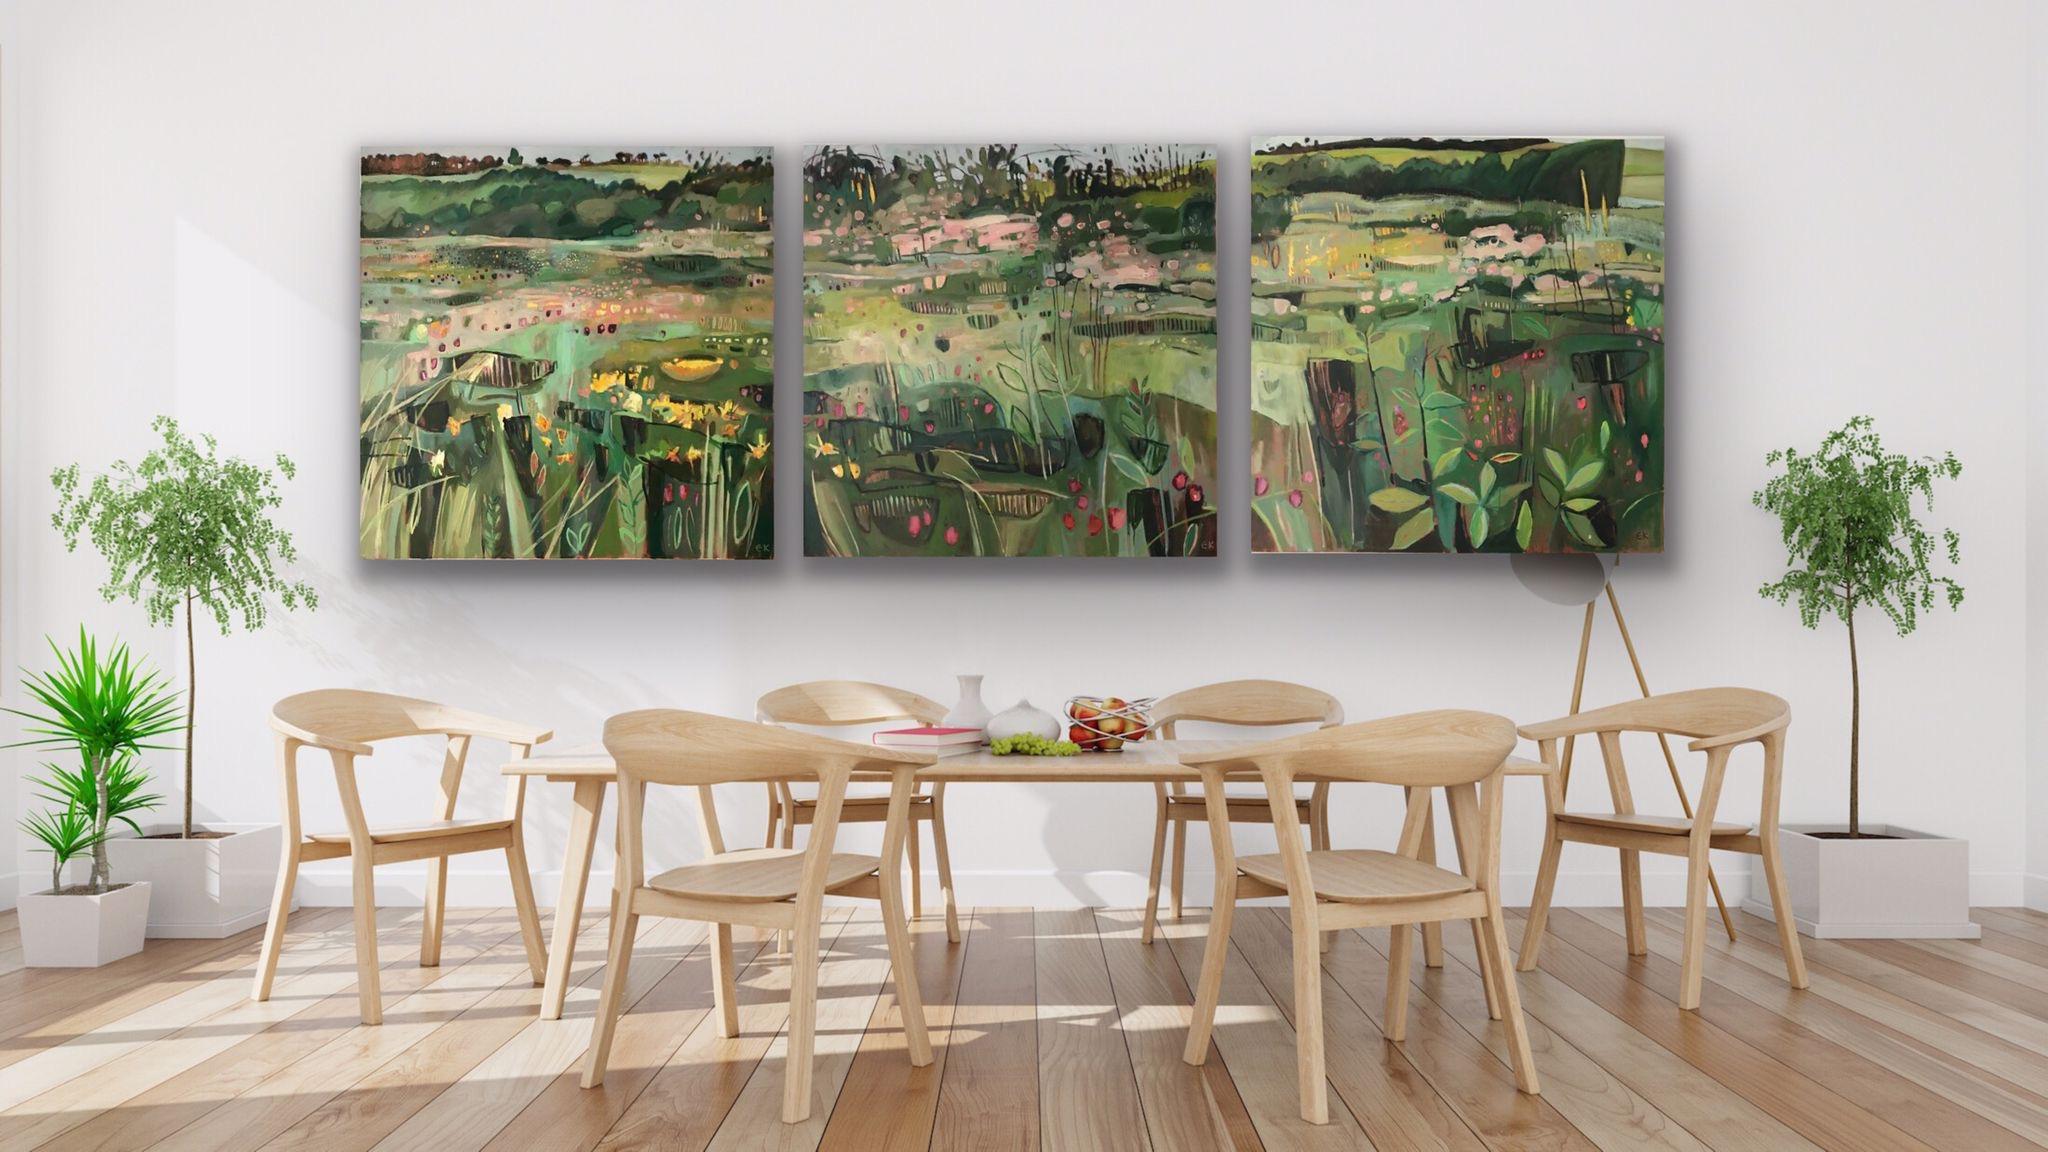 This triptych is a series of three panels which may be arranged together, in contact, slightly apart or even on separate walls. Each panel is 100 x 100cm. The two end (right and left) panels can also be made available as single panels or a diptych